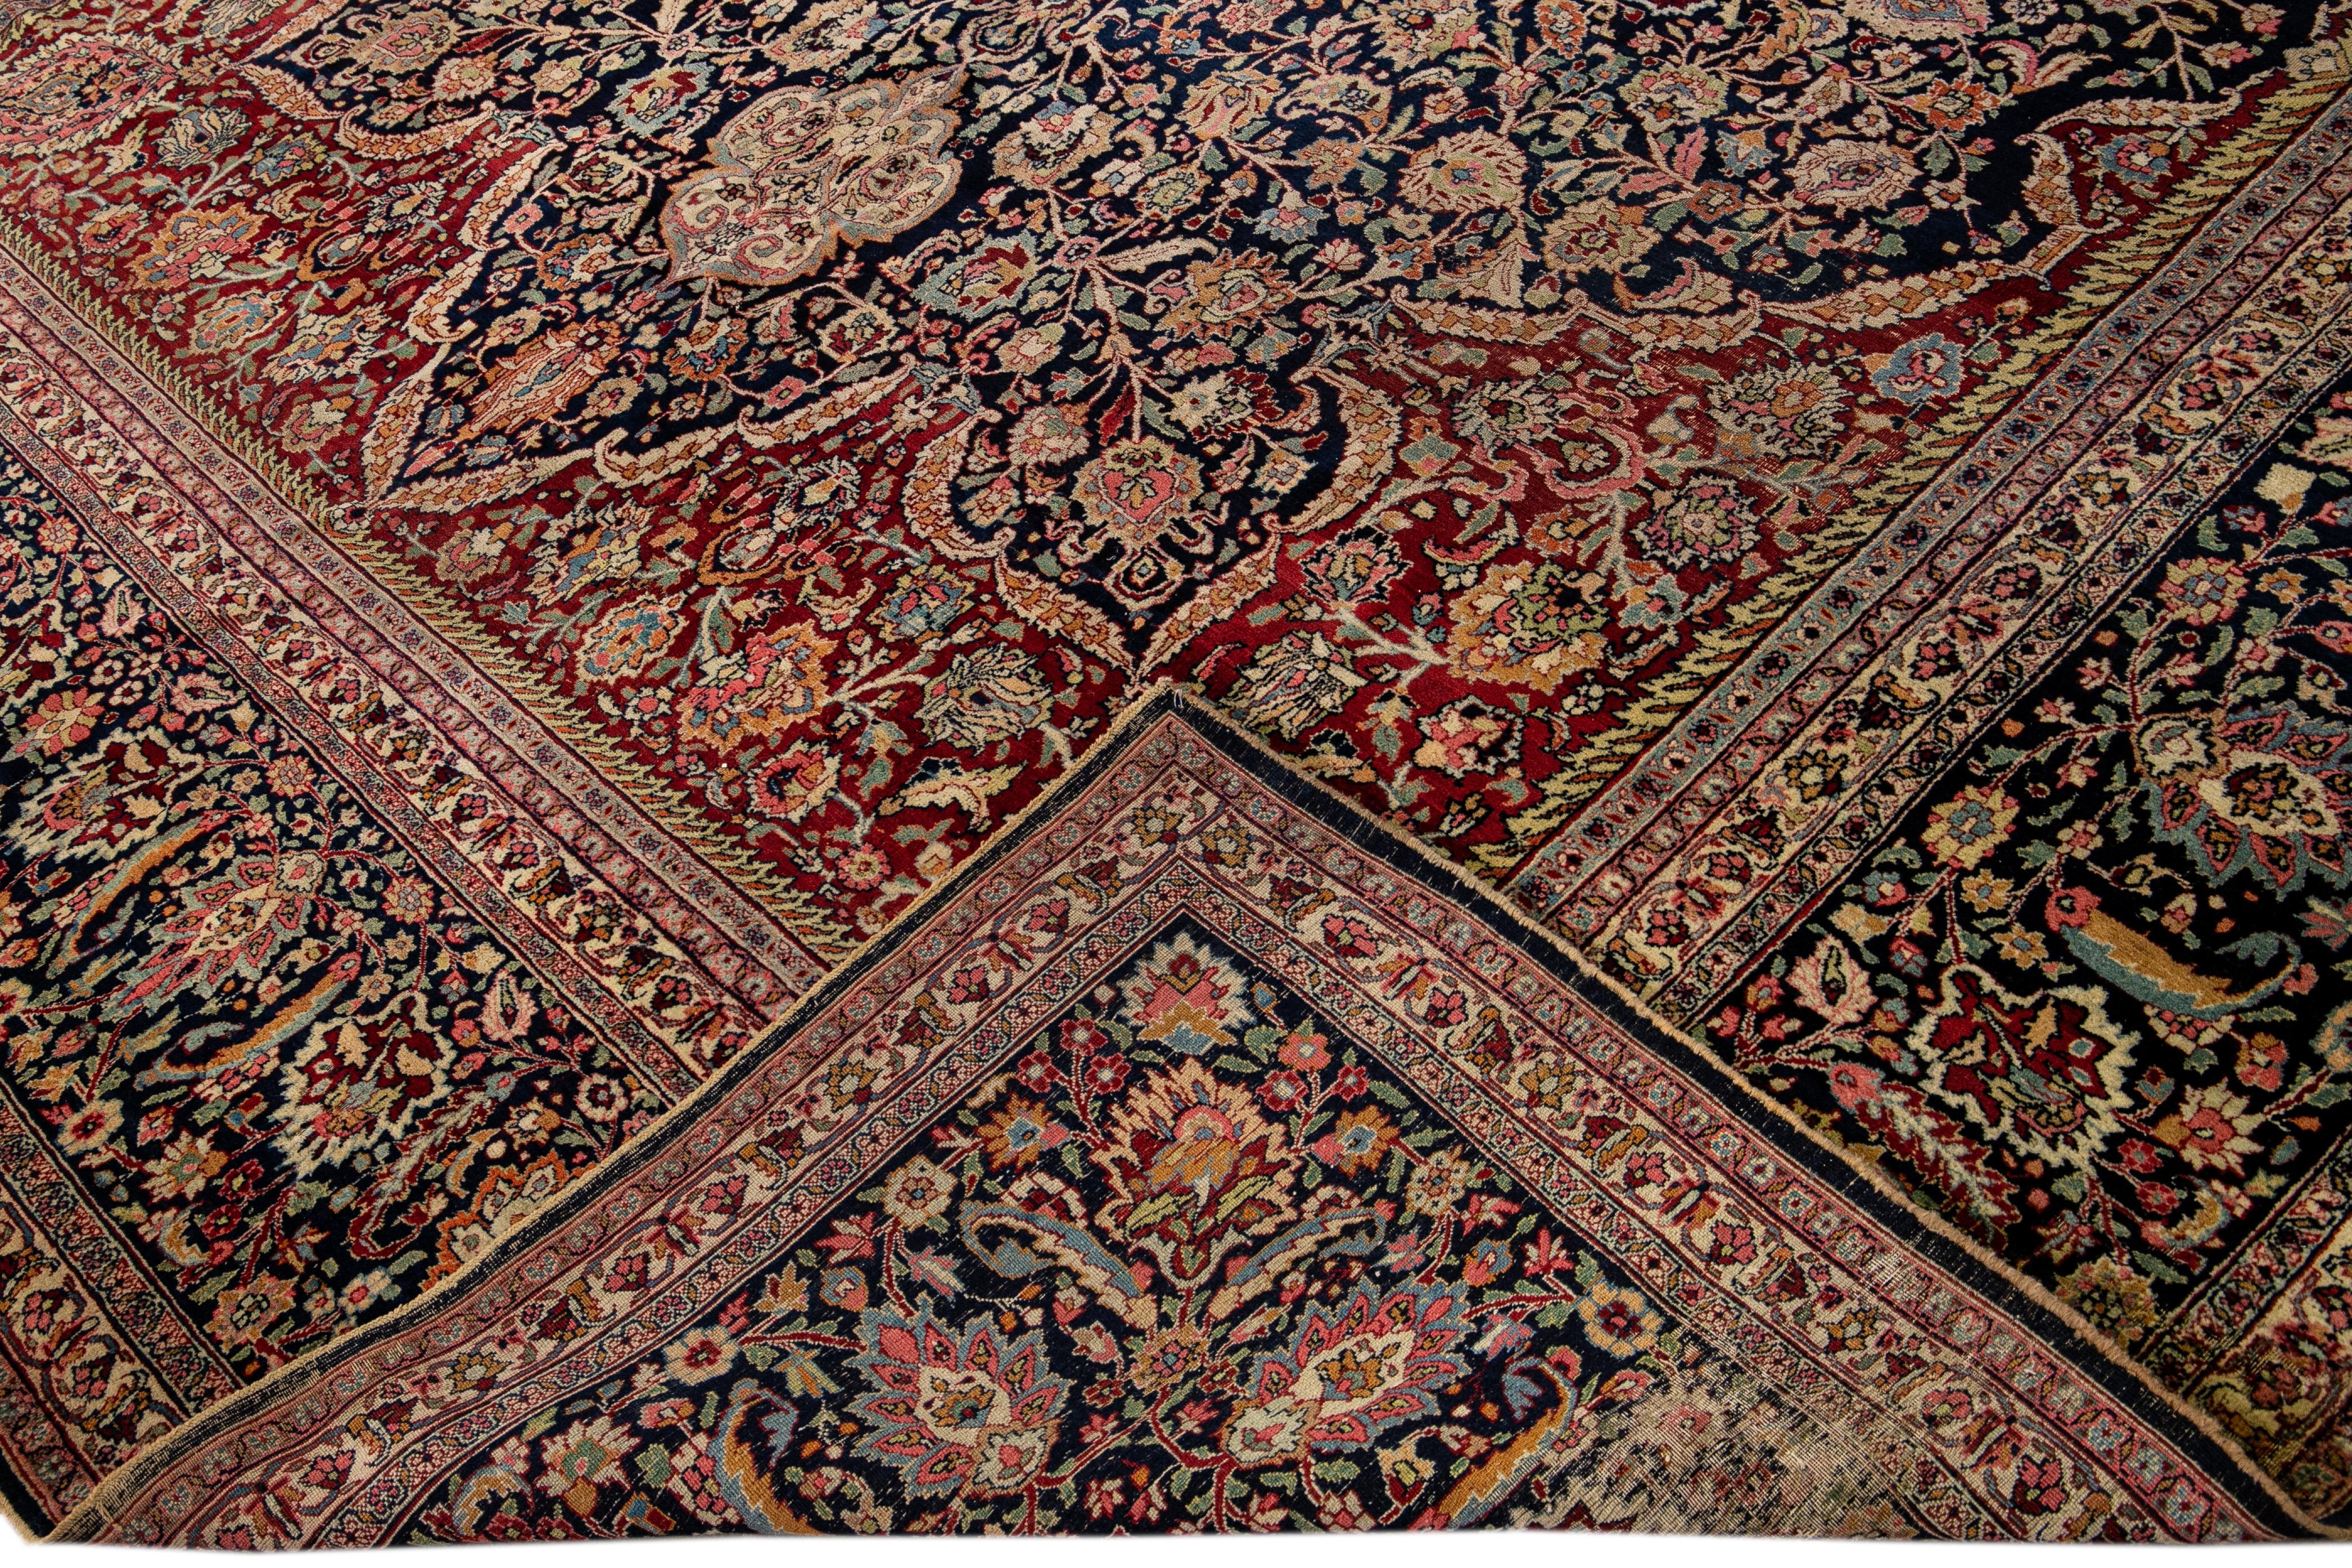 Beautiful antique tabriz hand-knotted wool rug with a red field. This Persian rug has a navy blue frame and multicolor accents in a gorgeous all-over geometric medallion floral motif.

This rug measures: 11'10